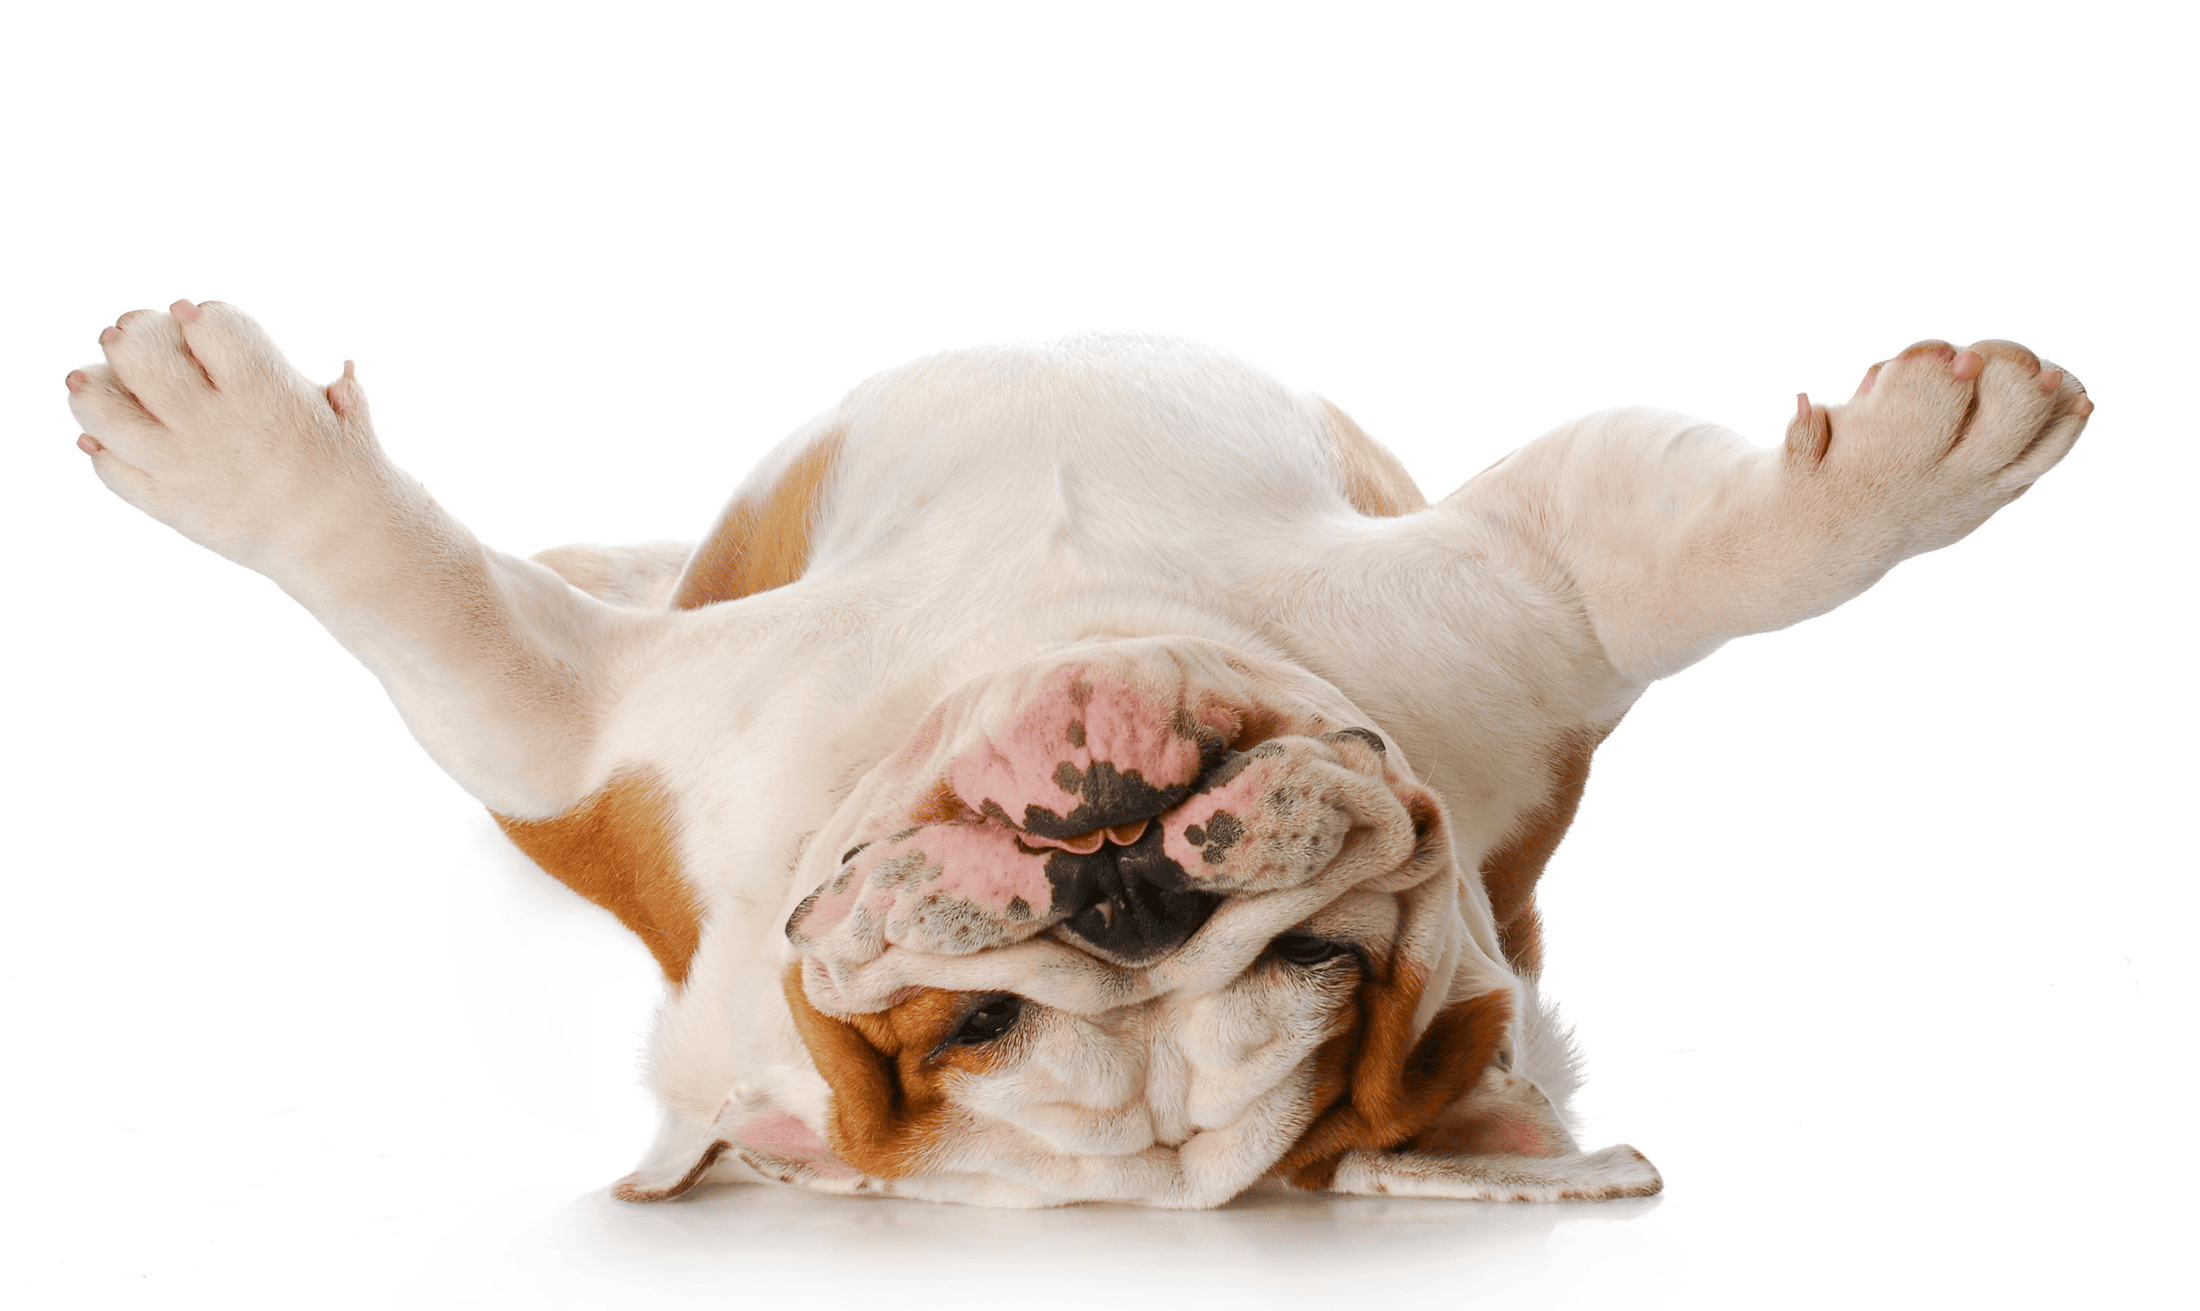 Dogs do some strange things. These were just the most common dog behaviors explained.